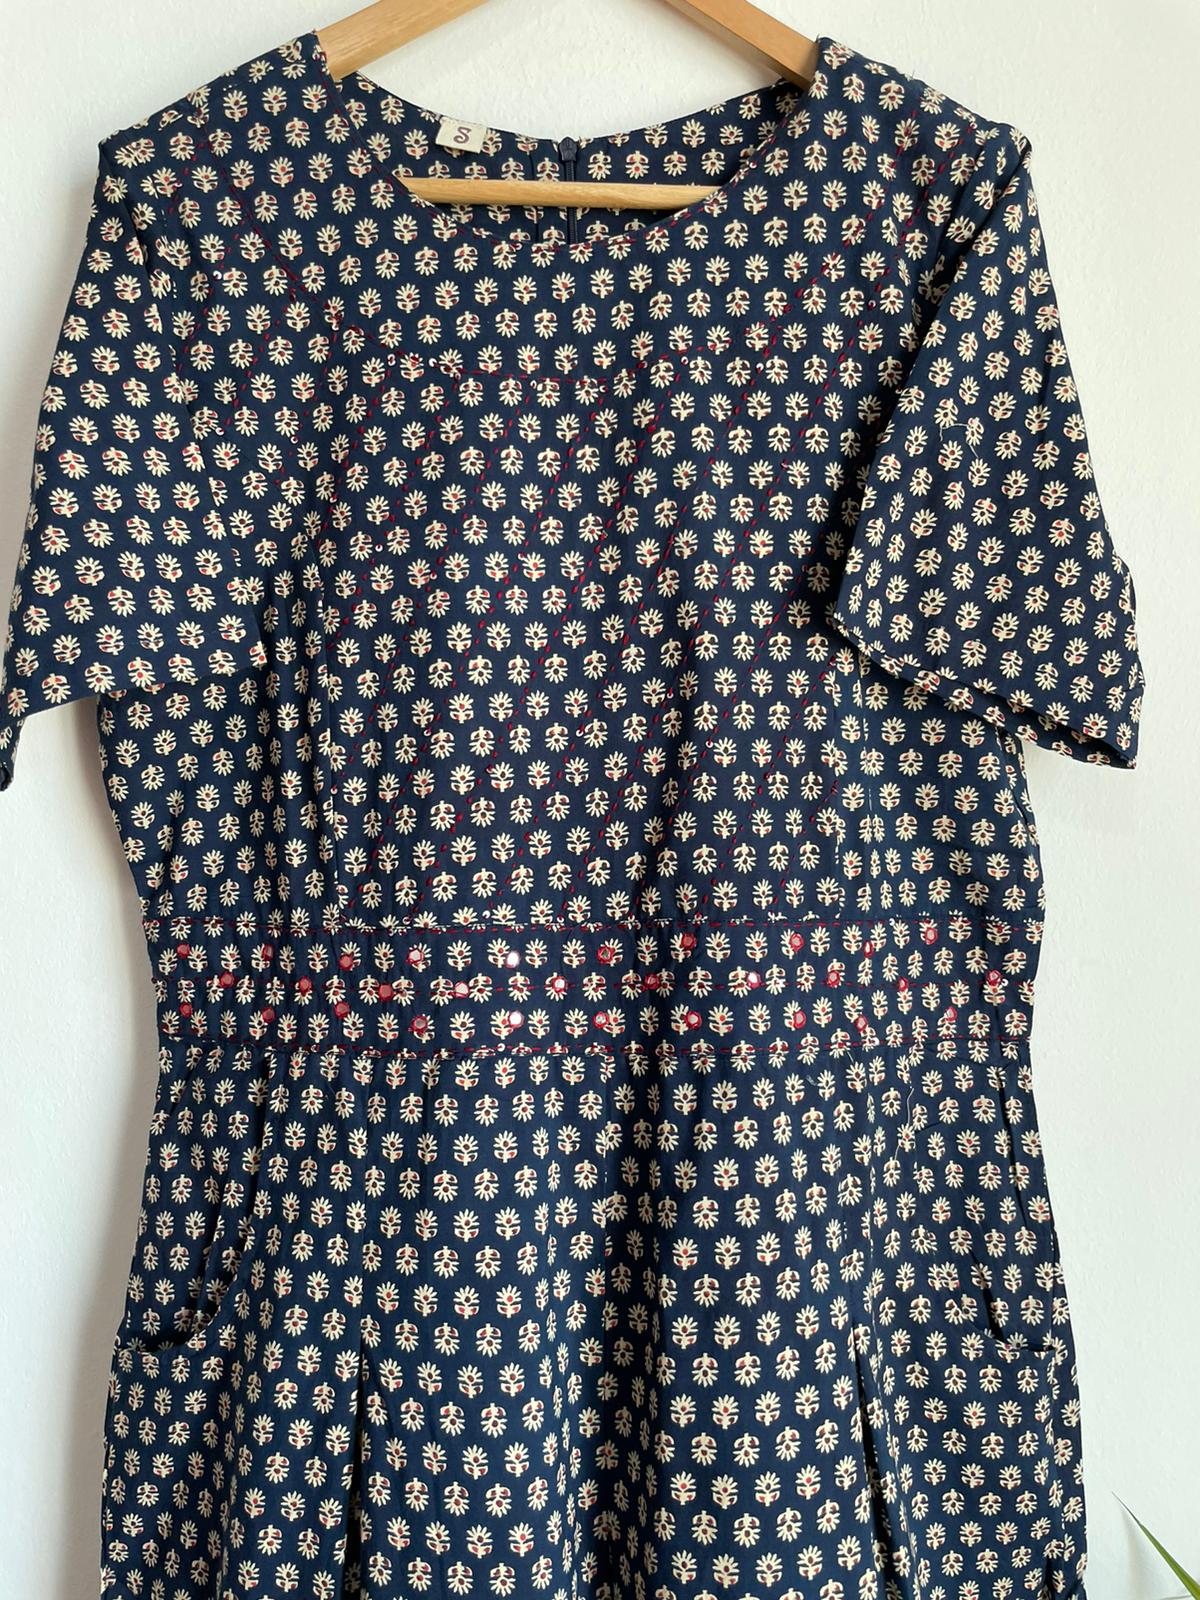 handmade and affordable jumpsuit for women in Singapore. Made from cotton